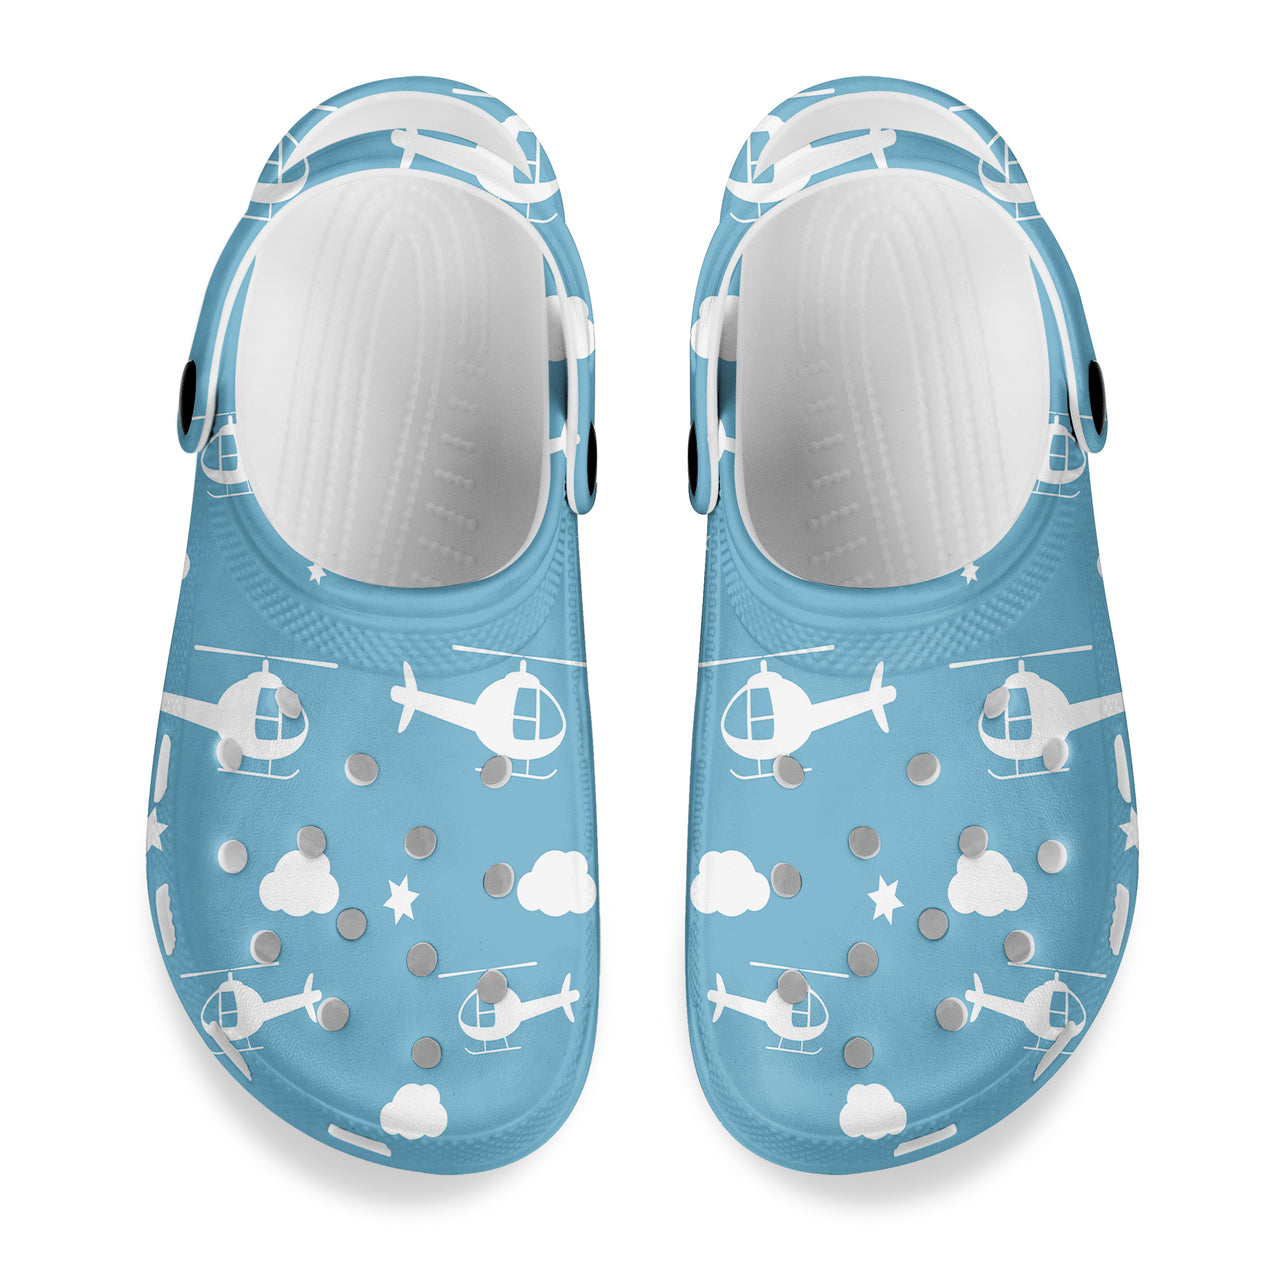 Helicopters & Clouds Designed Hole Shoes & Slippers (MEN)